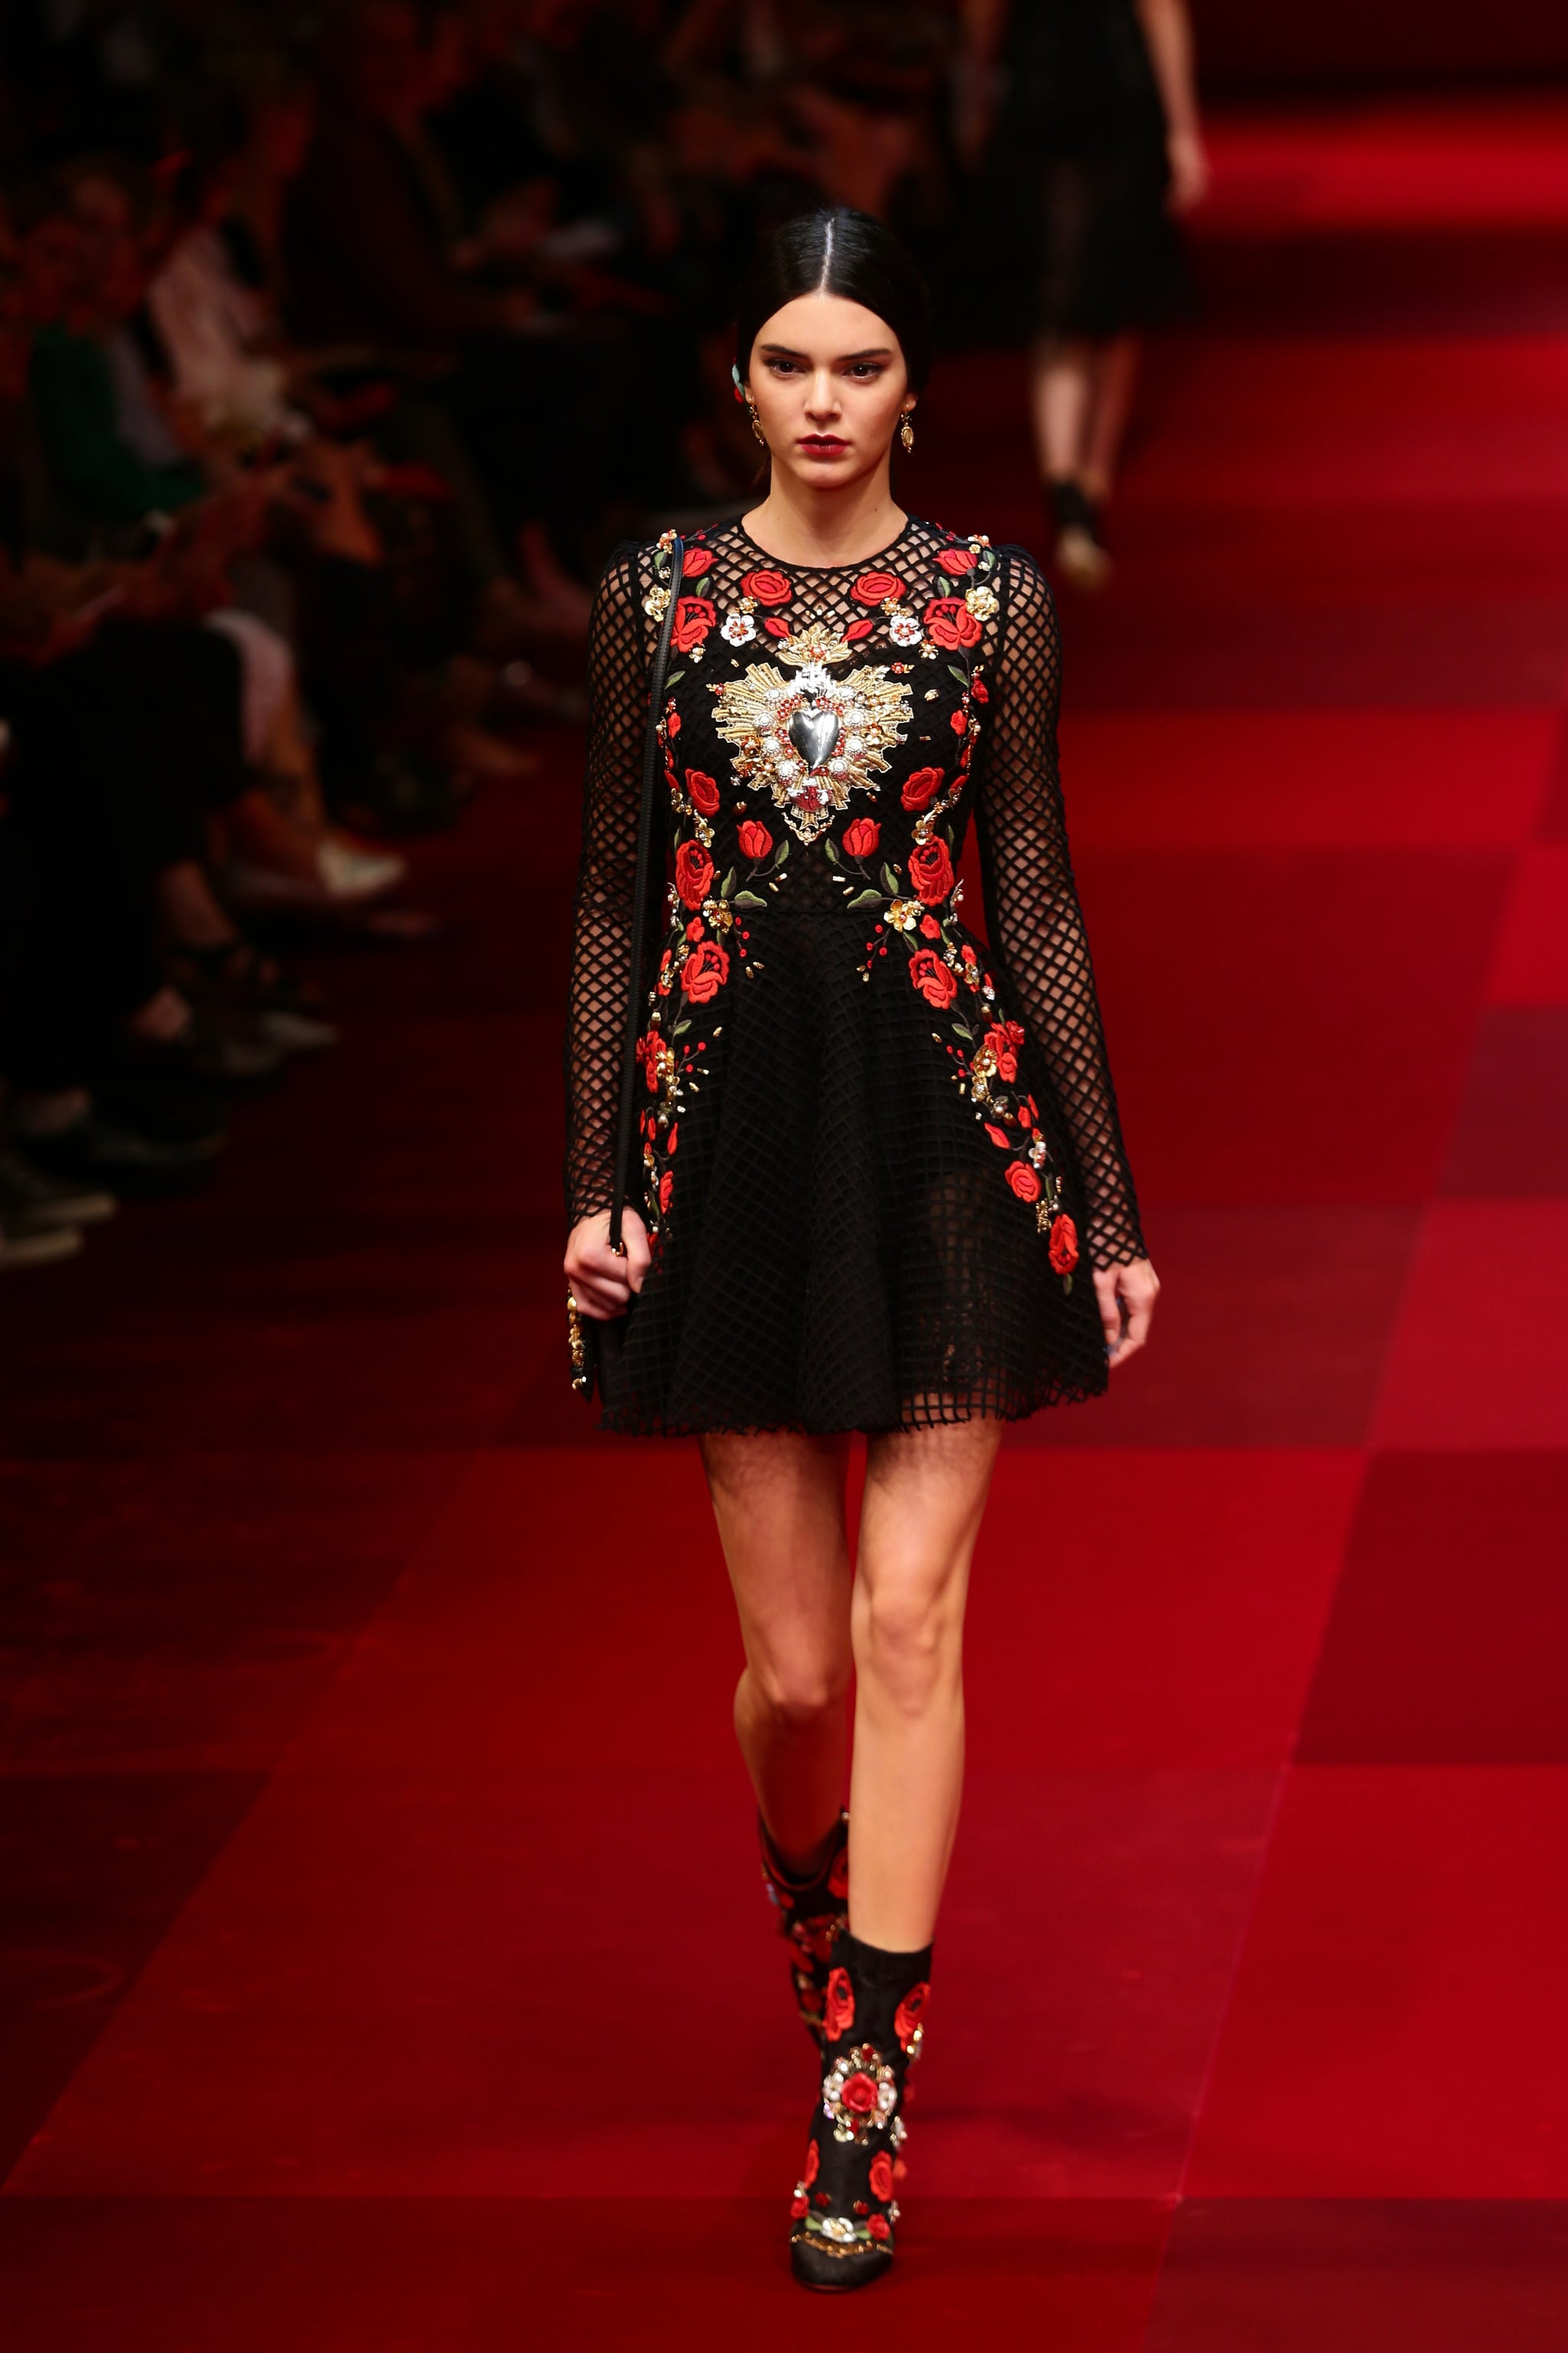 Dolce & Gabbana Spring 2015 | Take a Look Back Jenner's Most Iconic Runway Walks Through the Years | POPSUGAR Fashion Photo 15